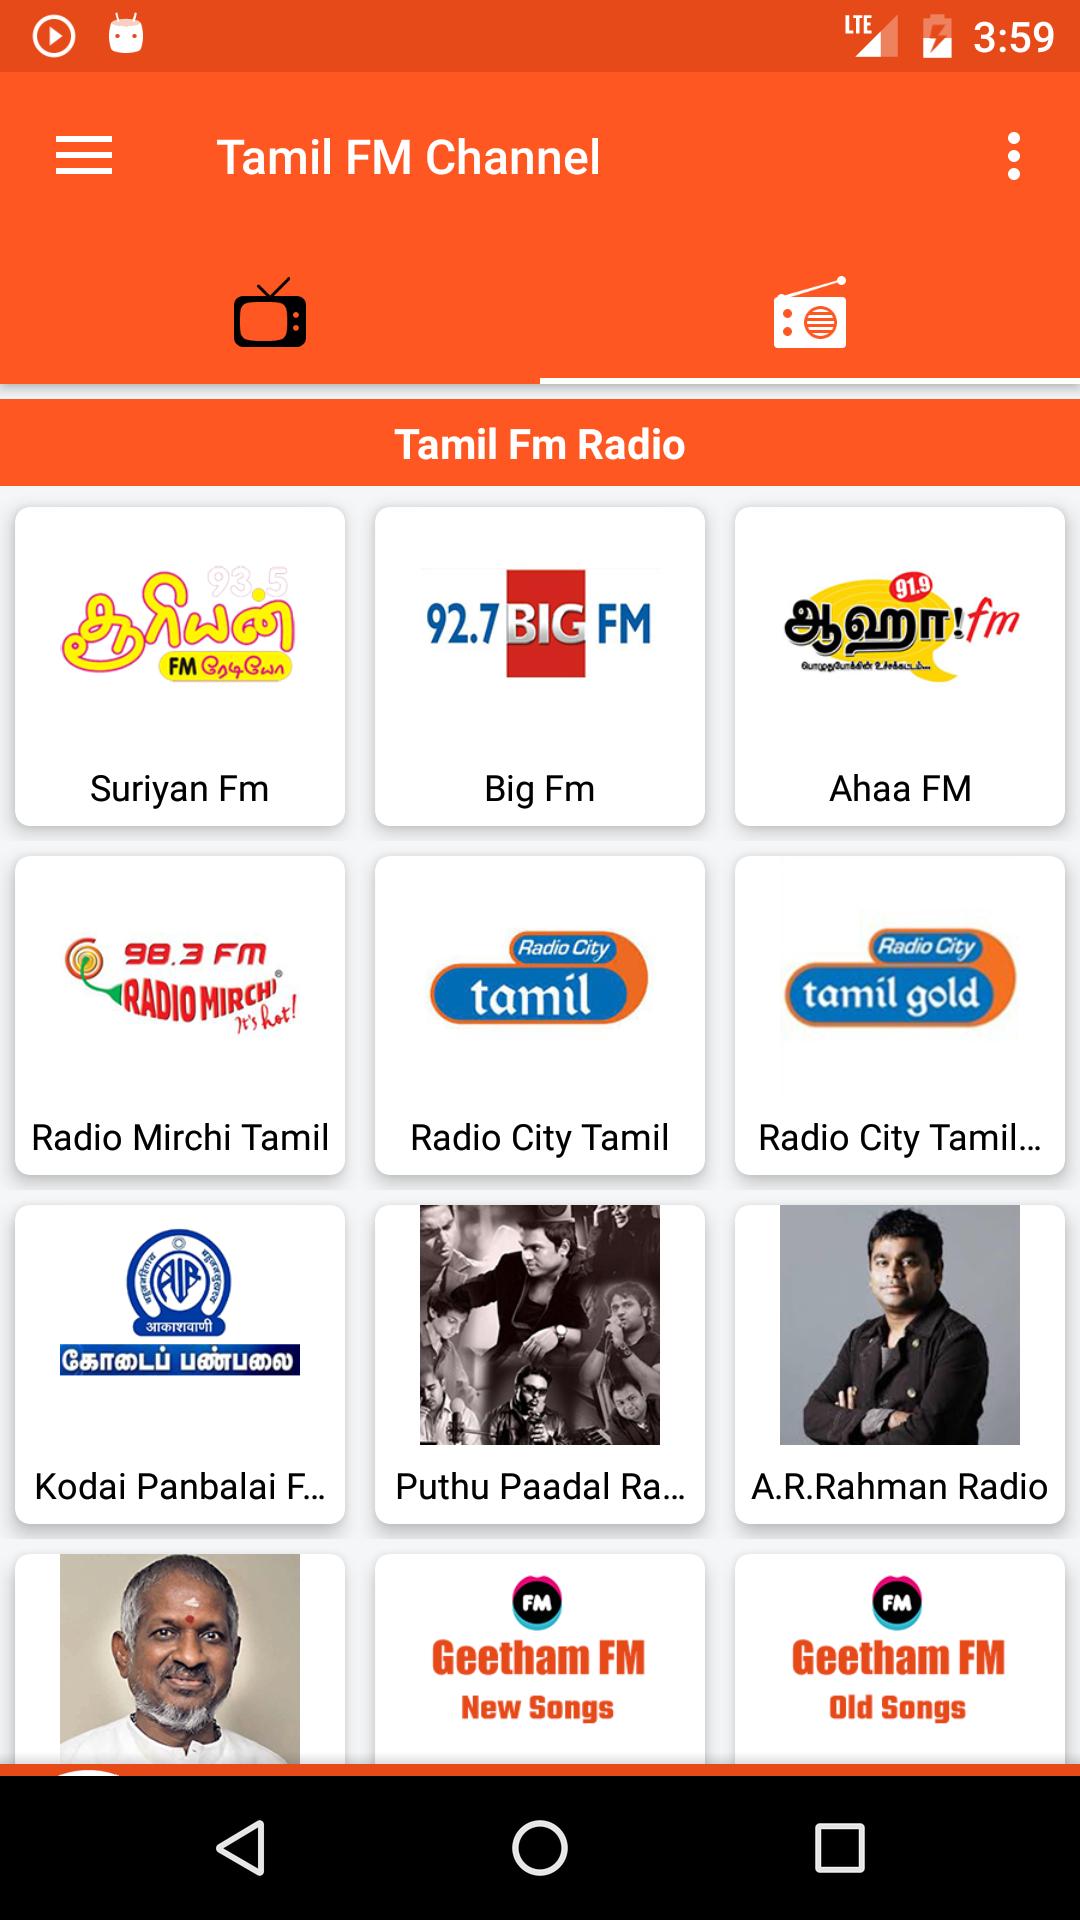 Tamil TV And Tamil FM Radio for Android - APK Download